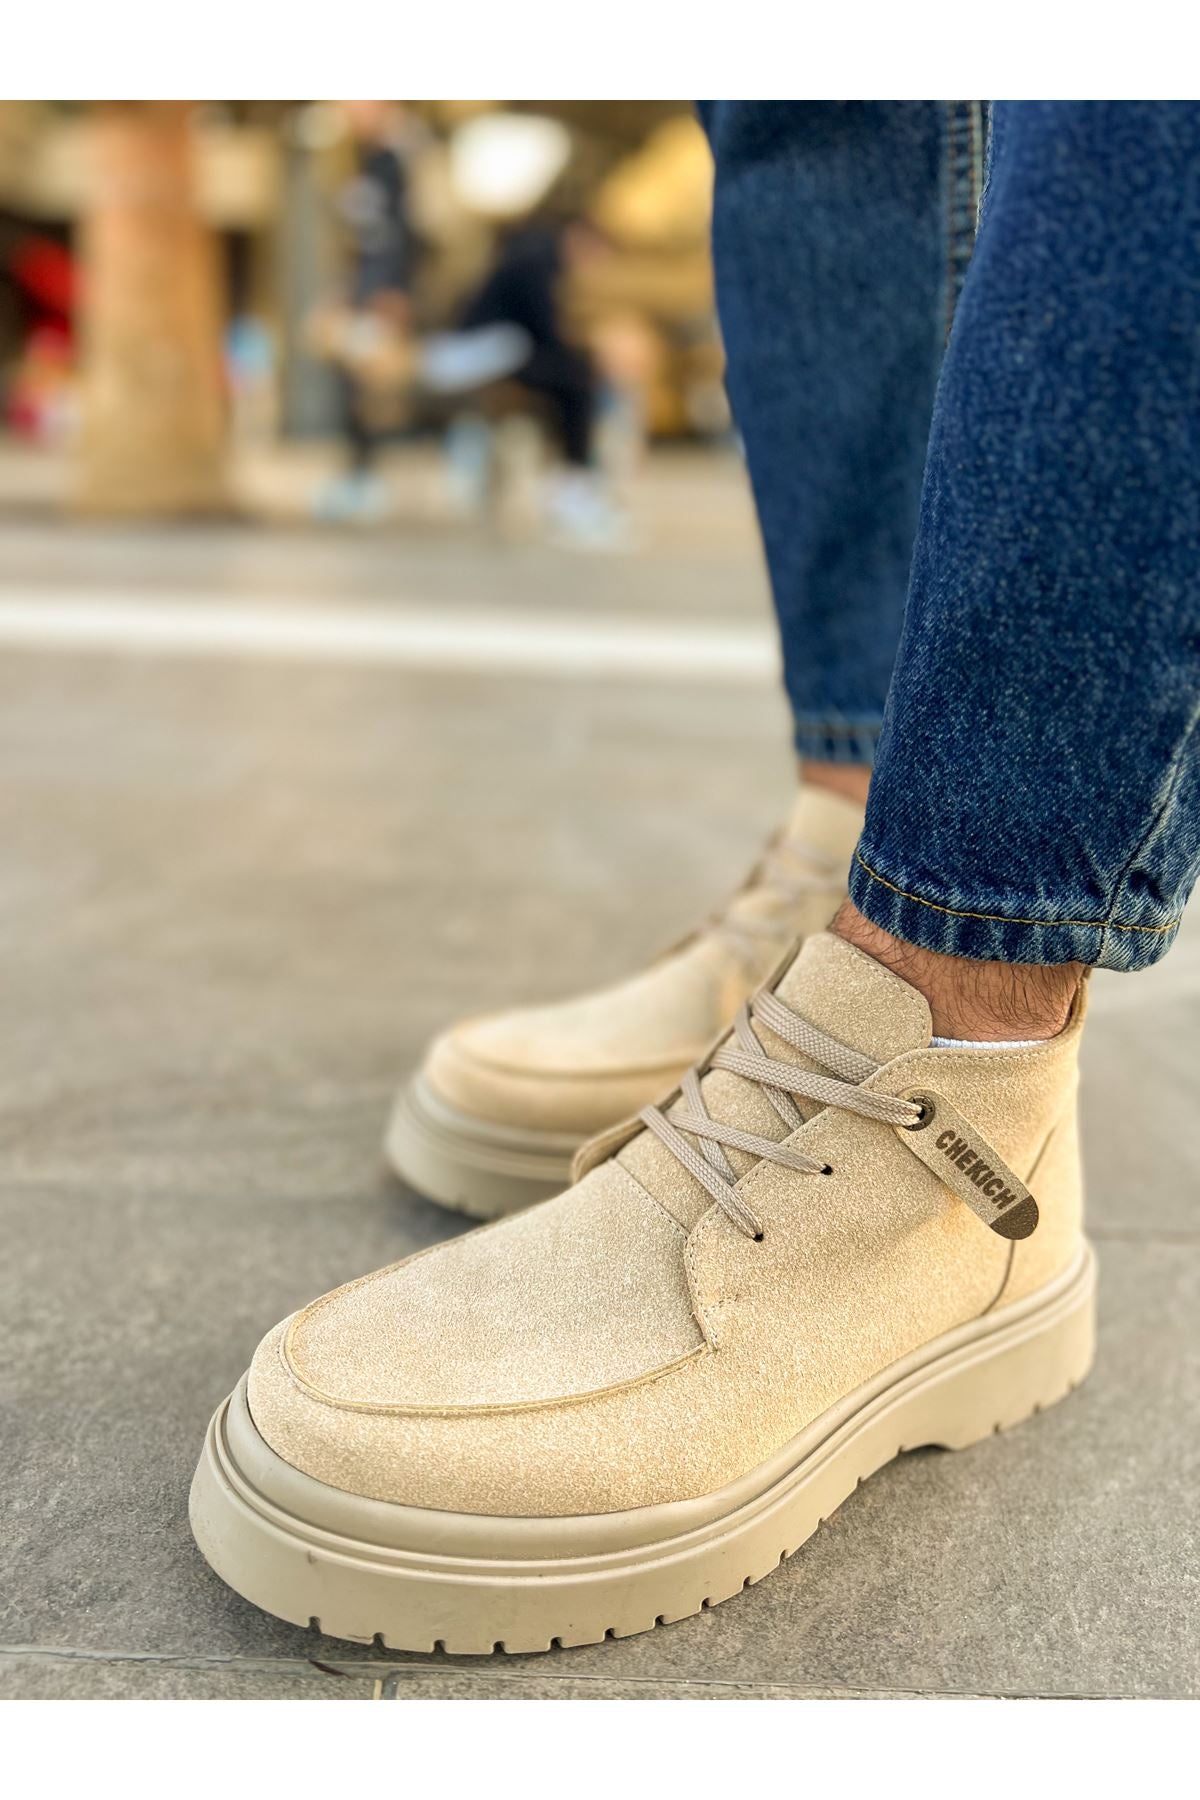 CH213 Men's Boots SAND Suede - STREETMODE™